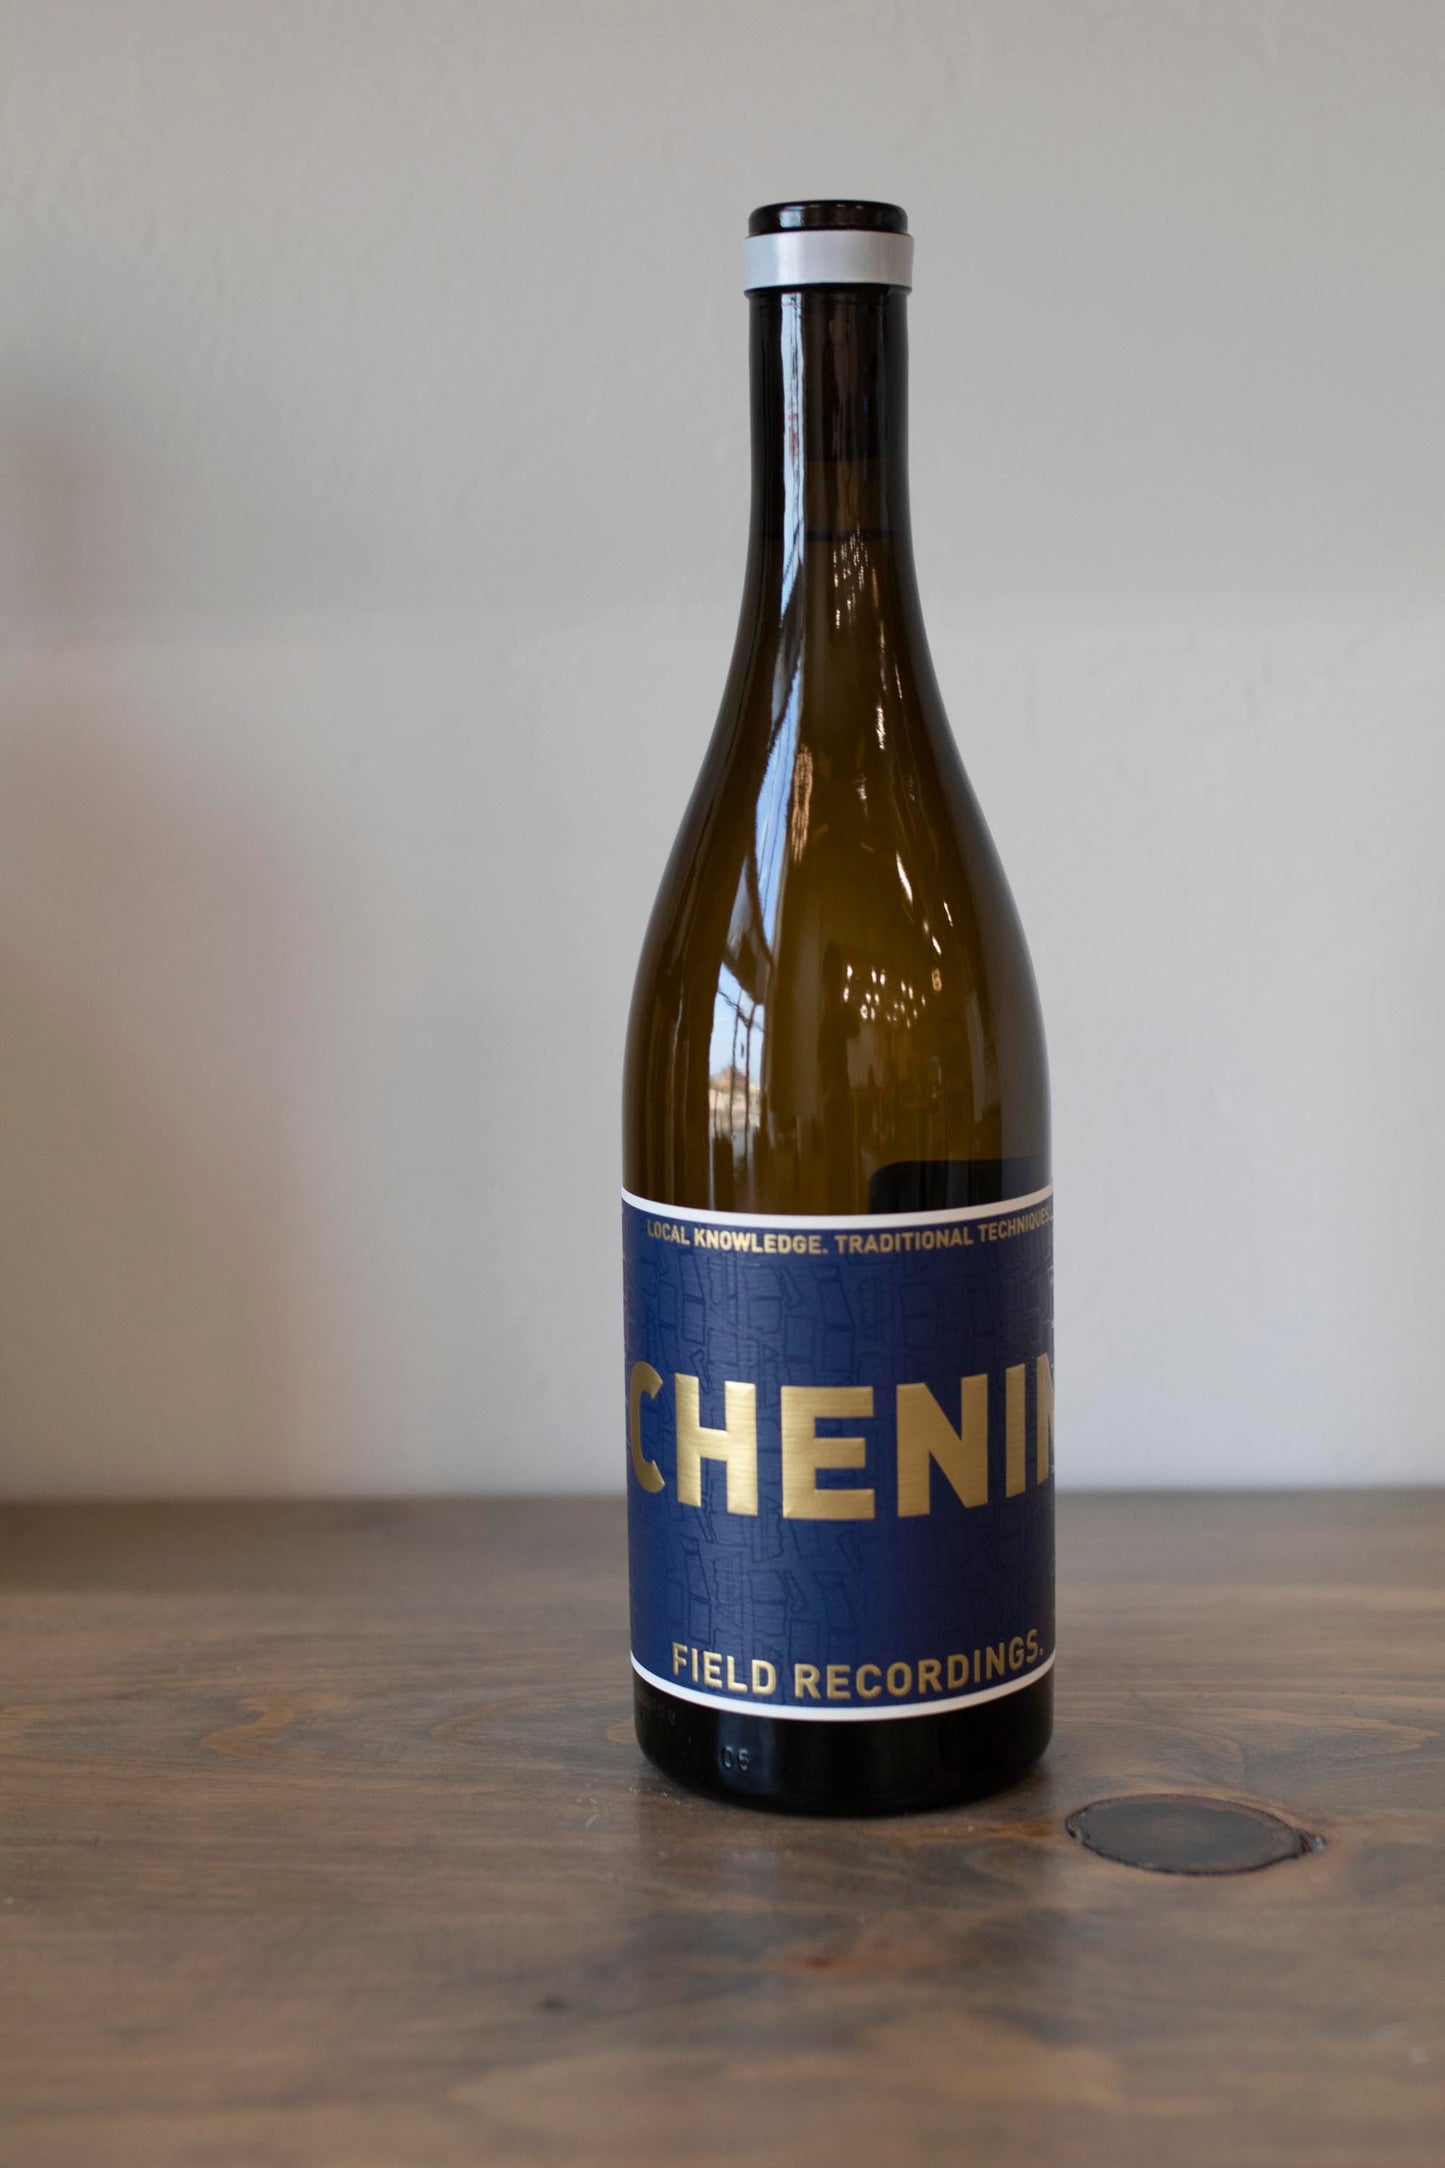 Bottle of Field Recordings CHENIN Blanc found at Vine & Board in 3809 NW 166th St Suite 1, Edmond, OK 73012